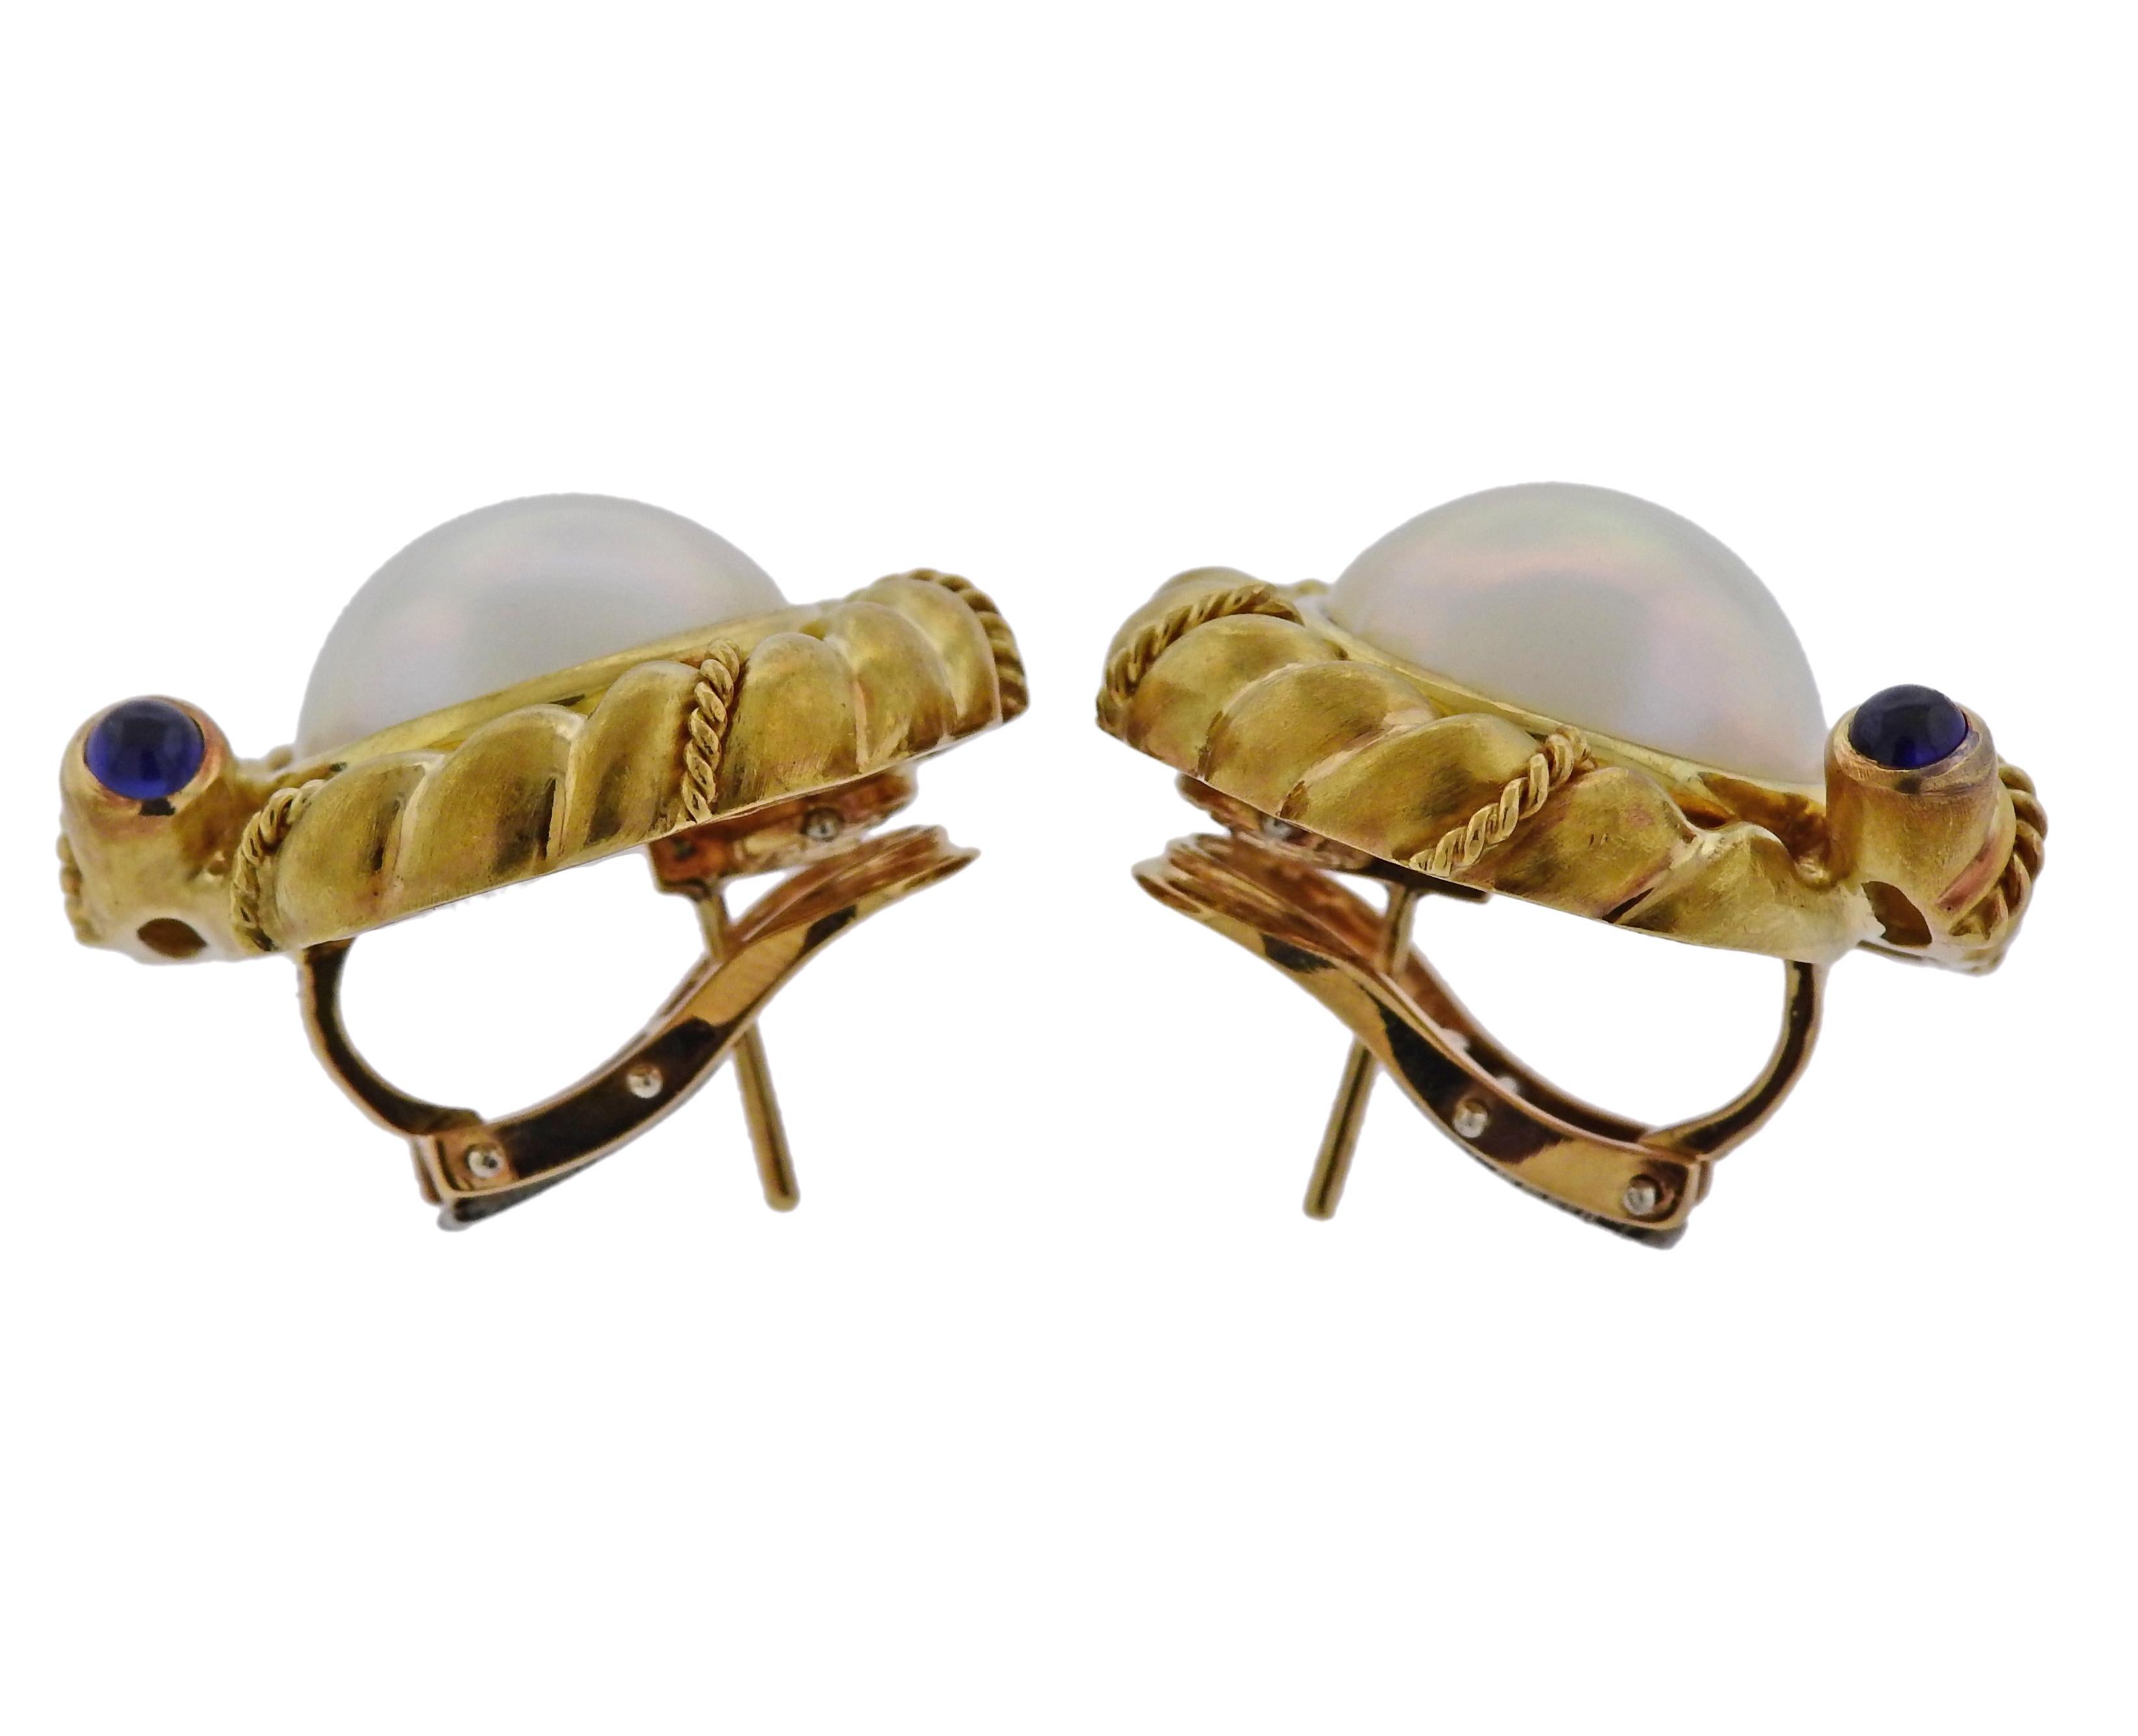 Pair of 18k yellow gold earrings, crafted by Tiffany & Co, set with 14.4mm mabe pearls, and sapphire cabochons. Earrings are 23mm in diameter  and weigh 29.4 grams. Marked Tiffany & Co, Italy, 750. 